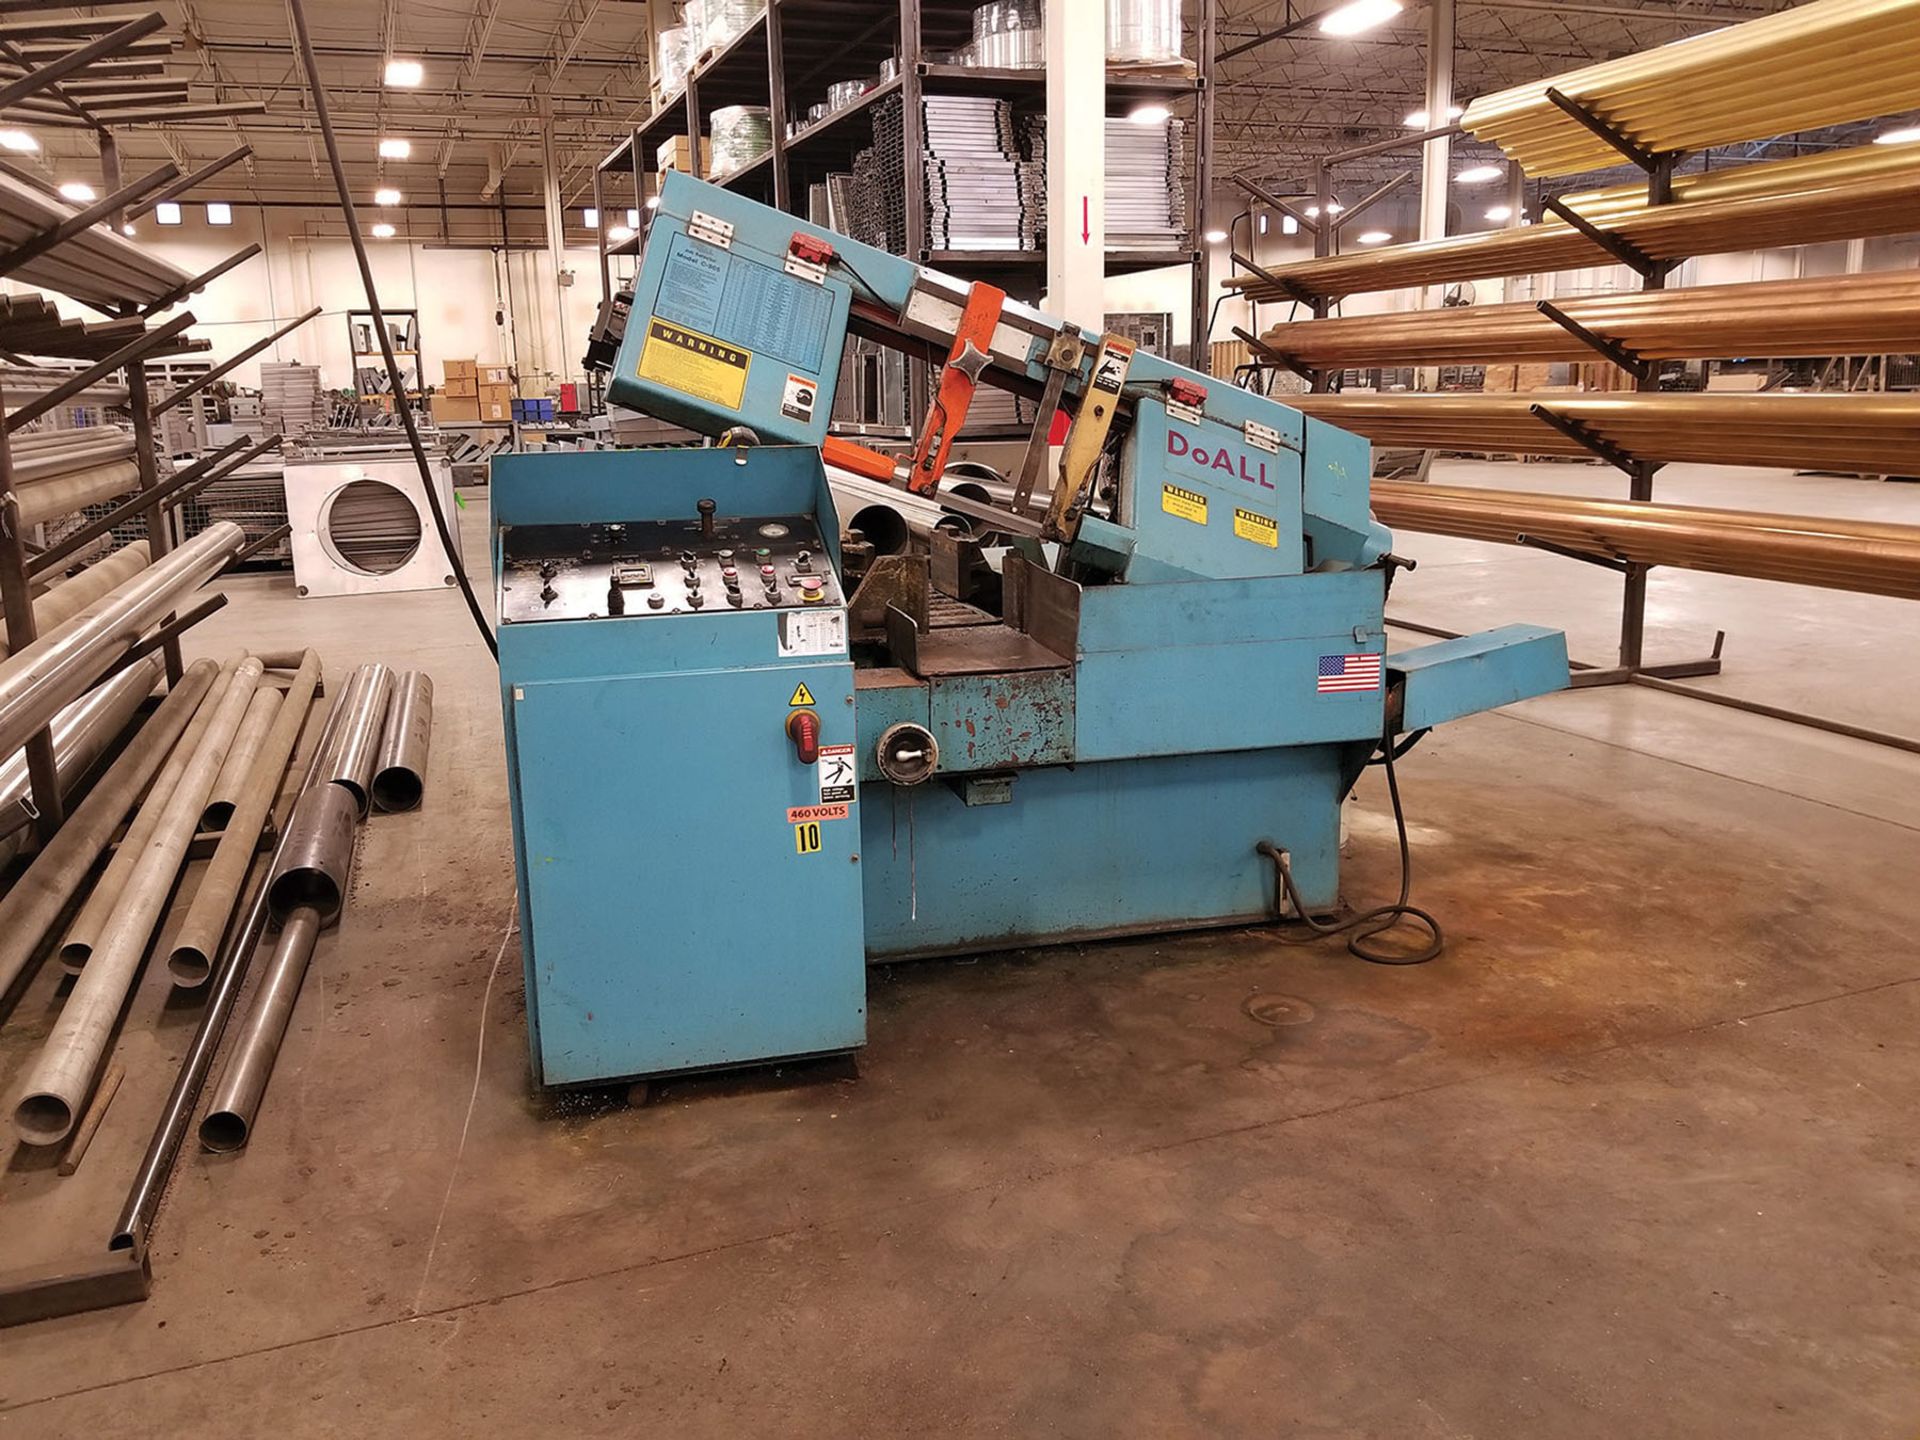 DOALL C-305 A AUTOMATIC HORIZONTAL BAND SAW, S/N 534-00314, 12' BAND LENGTH, LIMIT SWITCH &